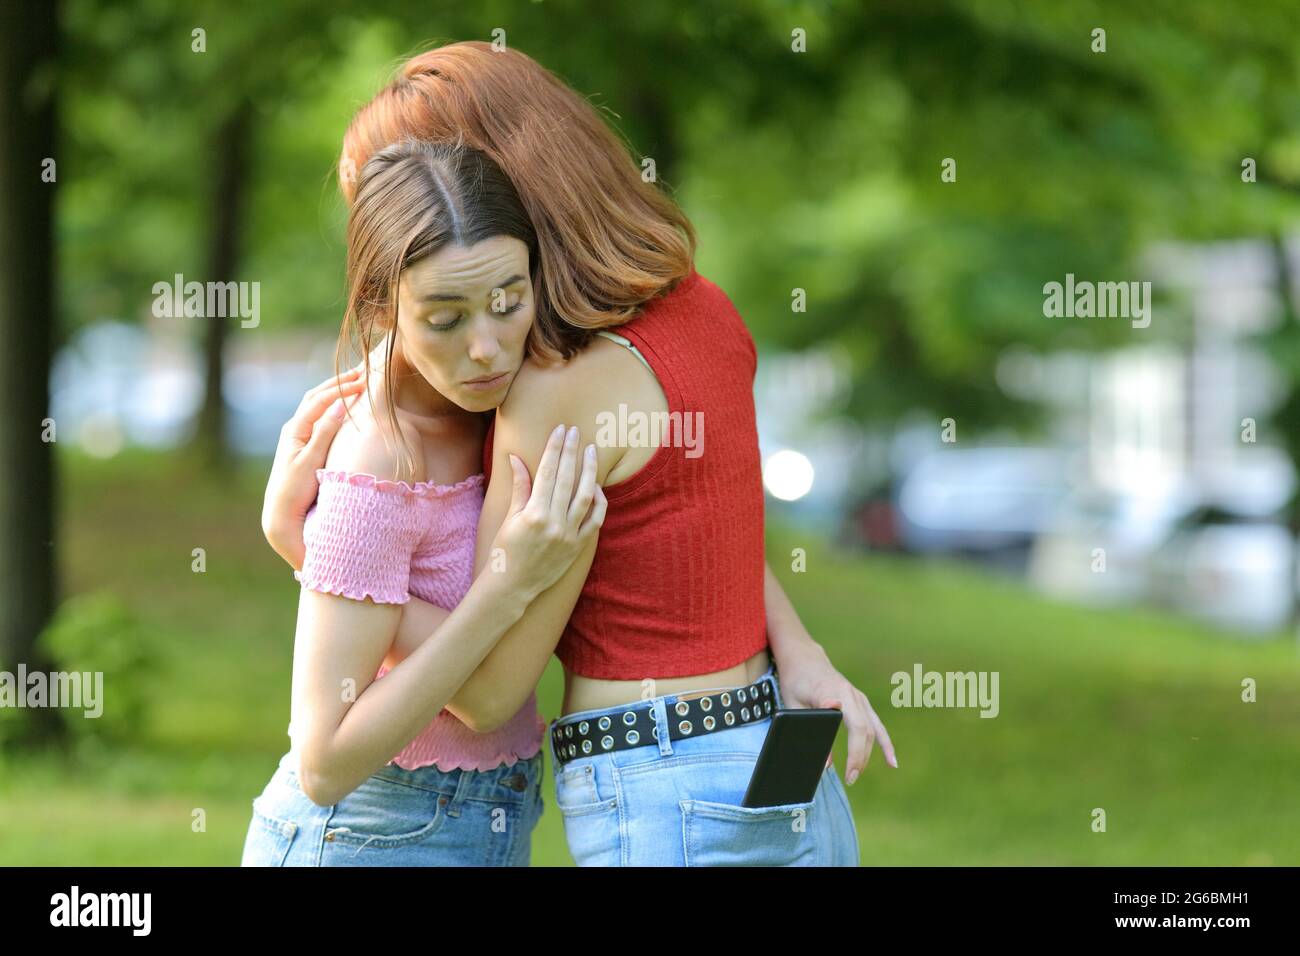 Woman spying her friend checking smart phone content in a park Stock Photo